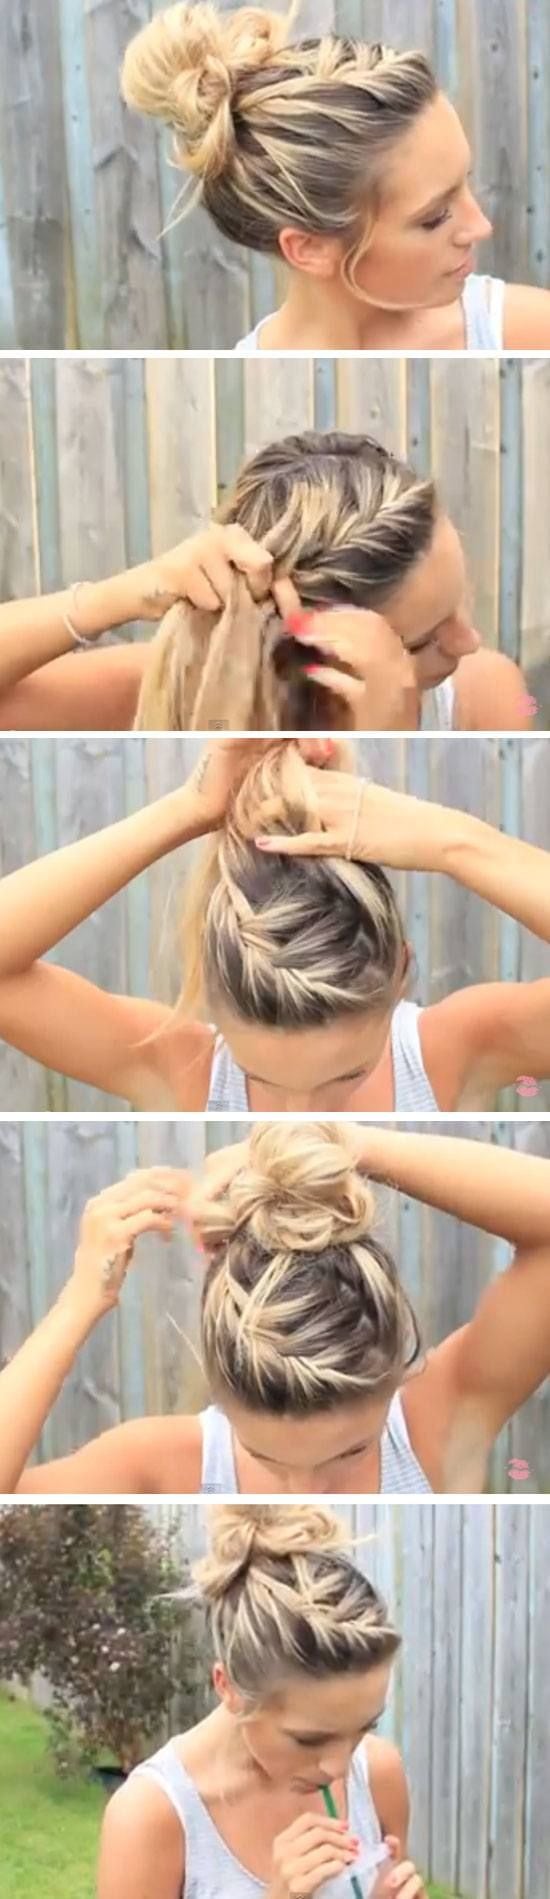 [ad_1]

Easy DIY Hairstyles for The Beach | Messy Bun
Source by bloemsabine
[ad_2]
			
			…